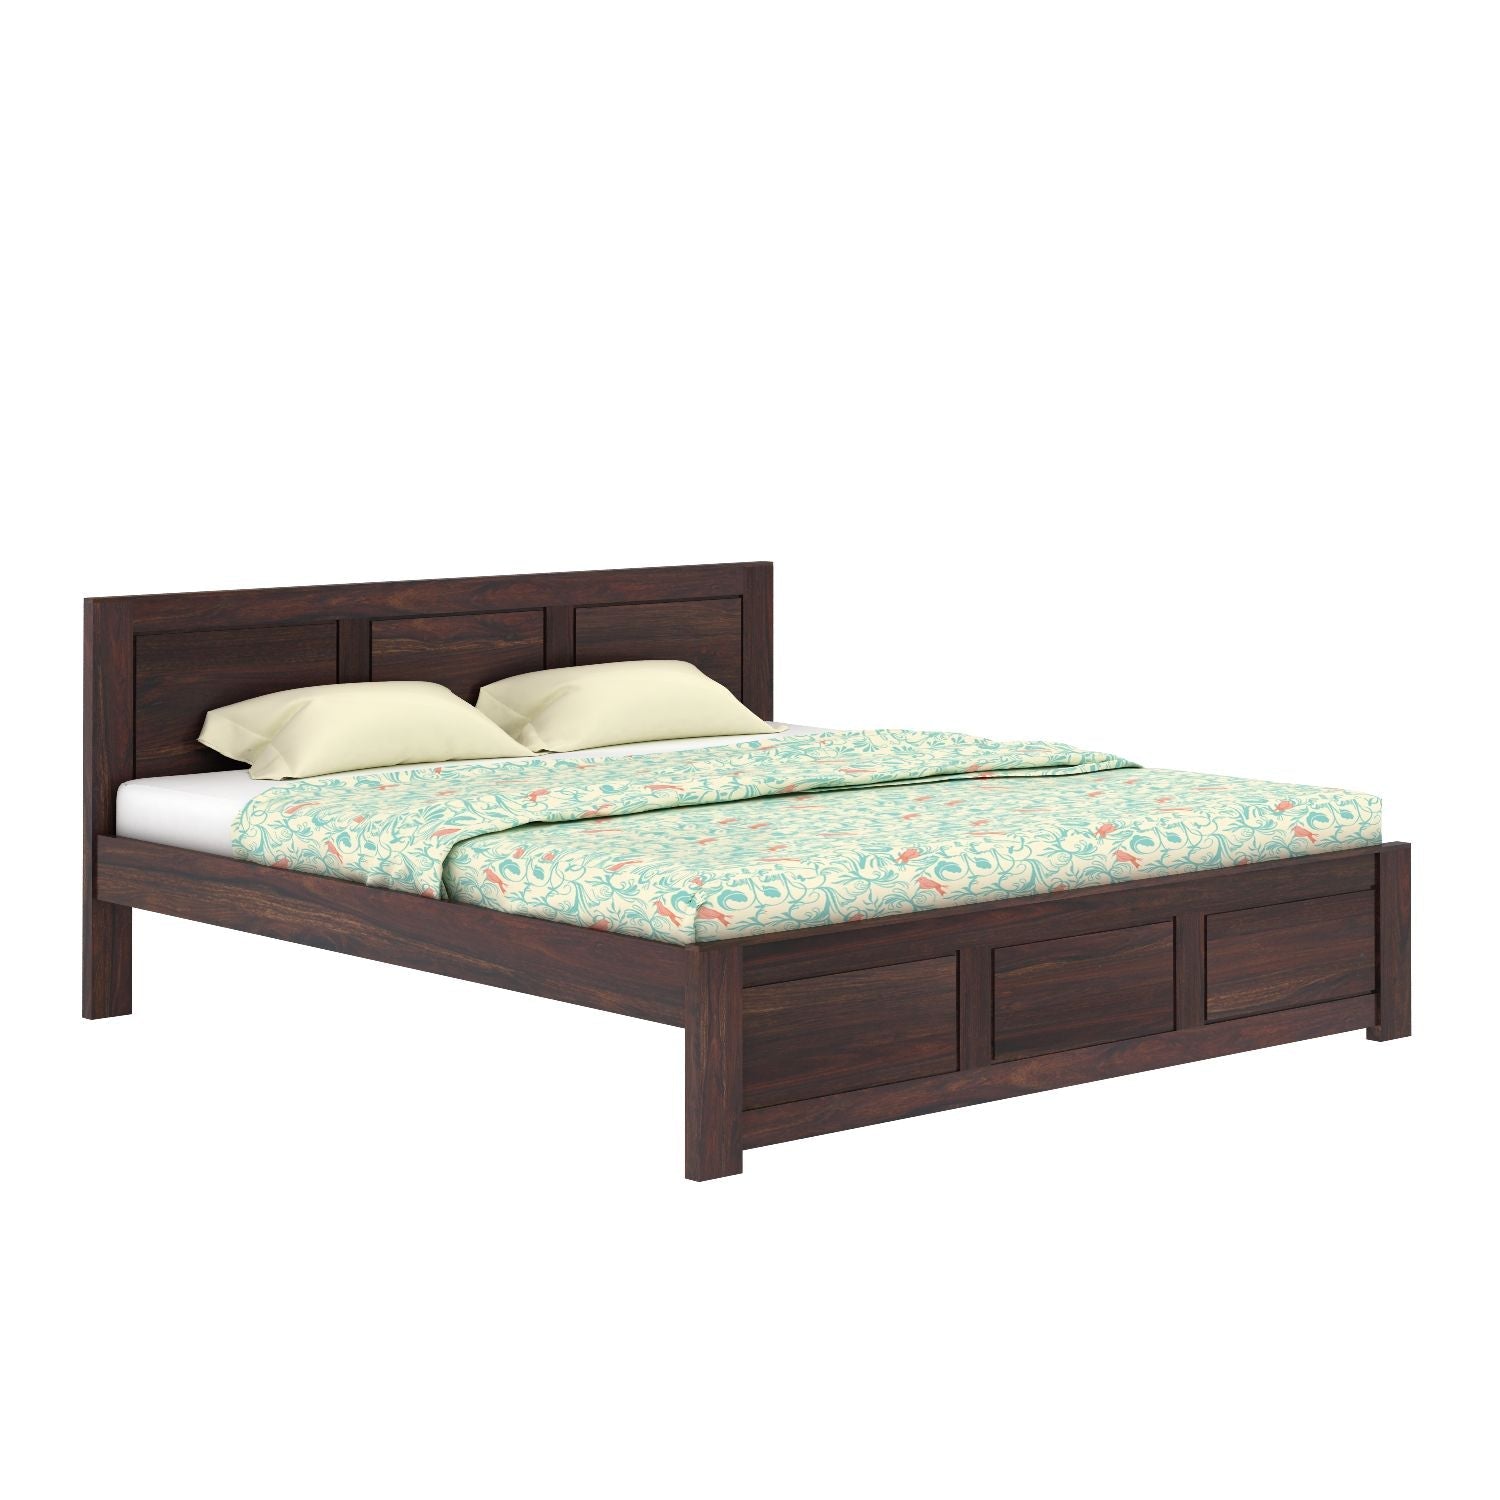 Woodwing Solid Sheesham Wood Bed Without Storage (Queen Size, Walnut Finish)